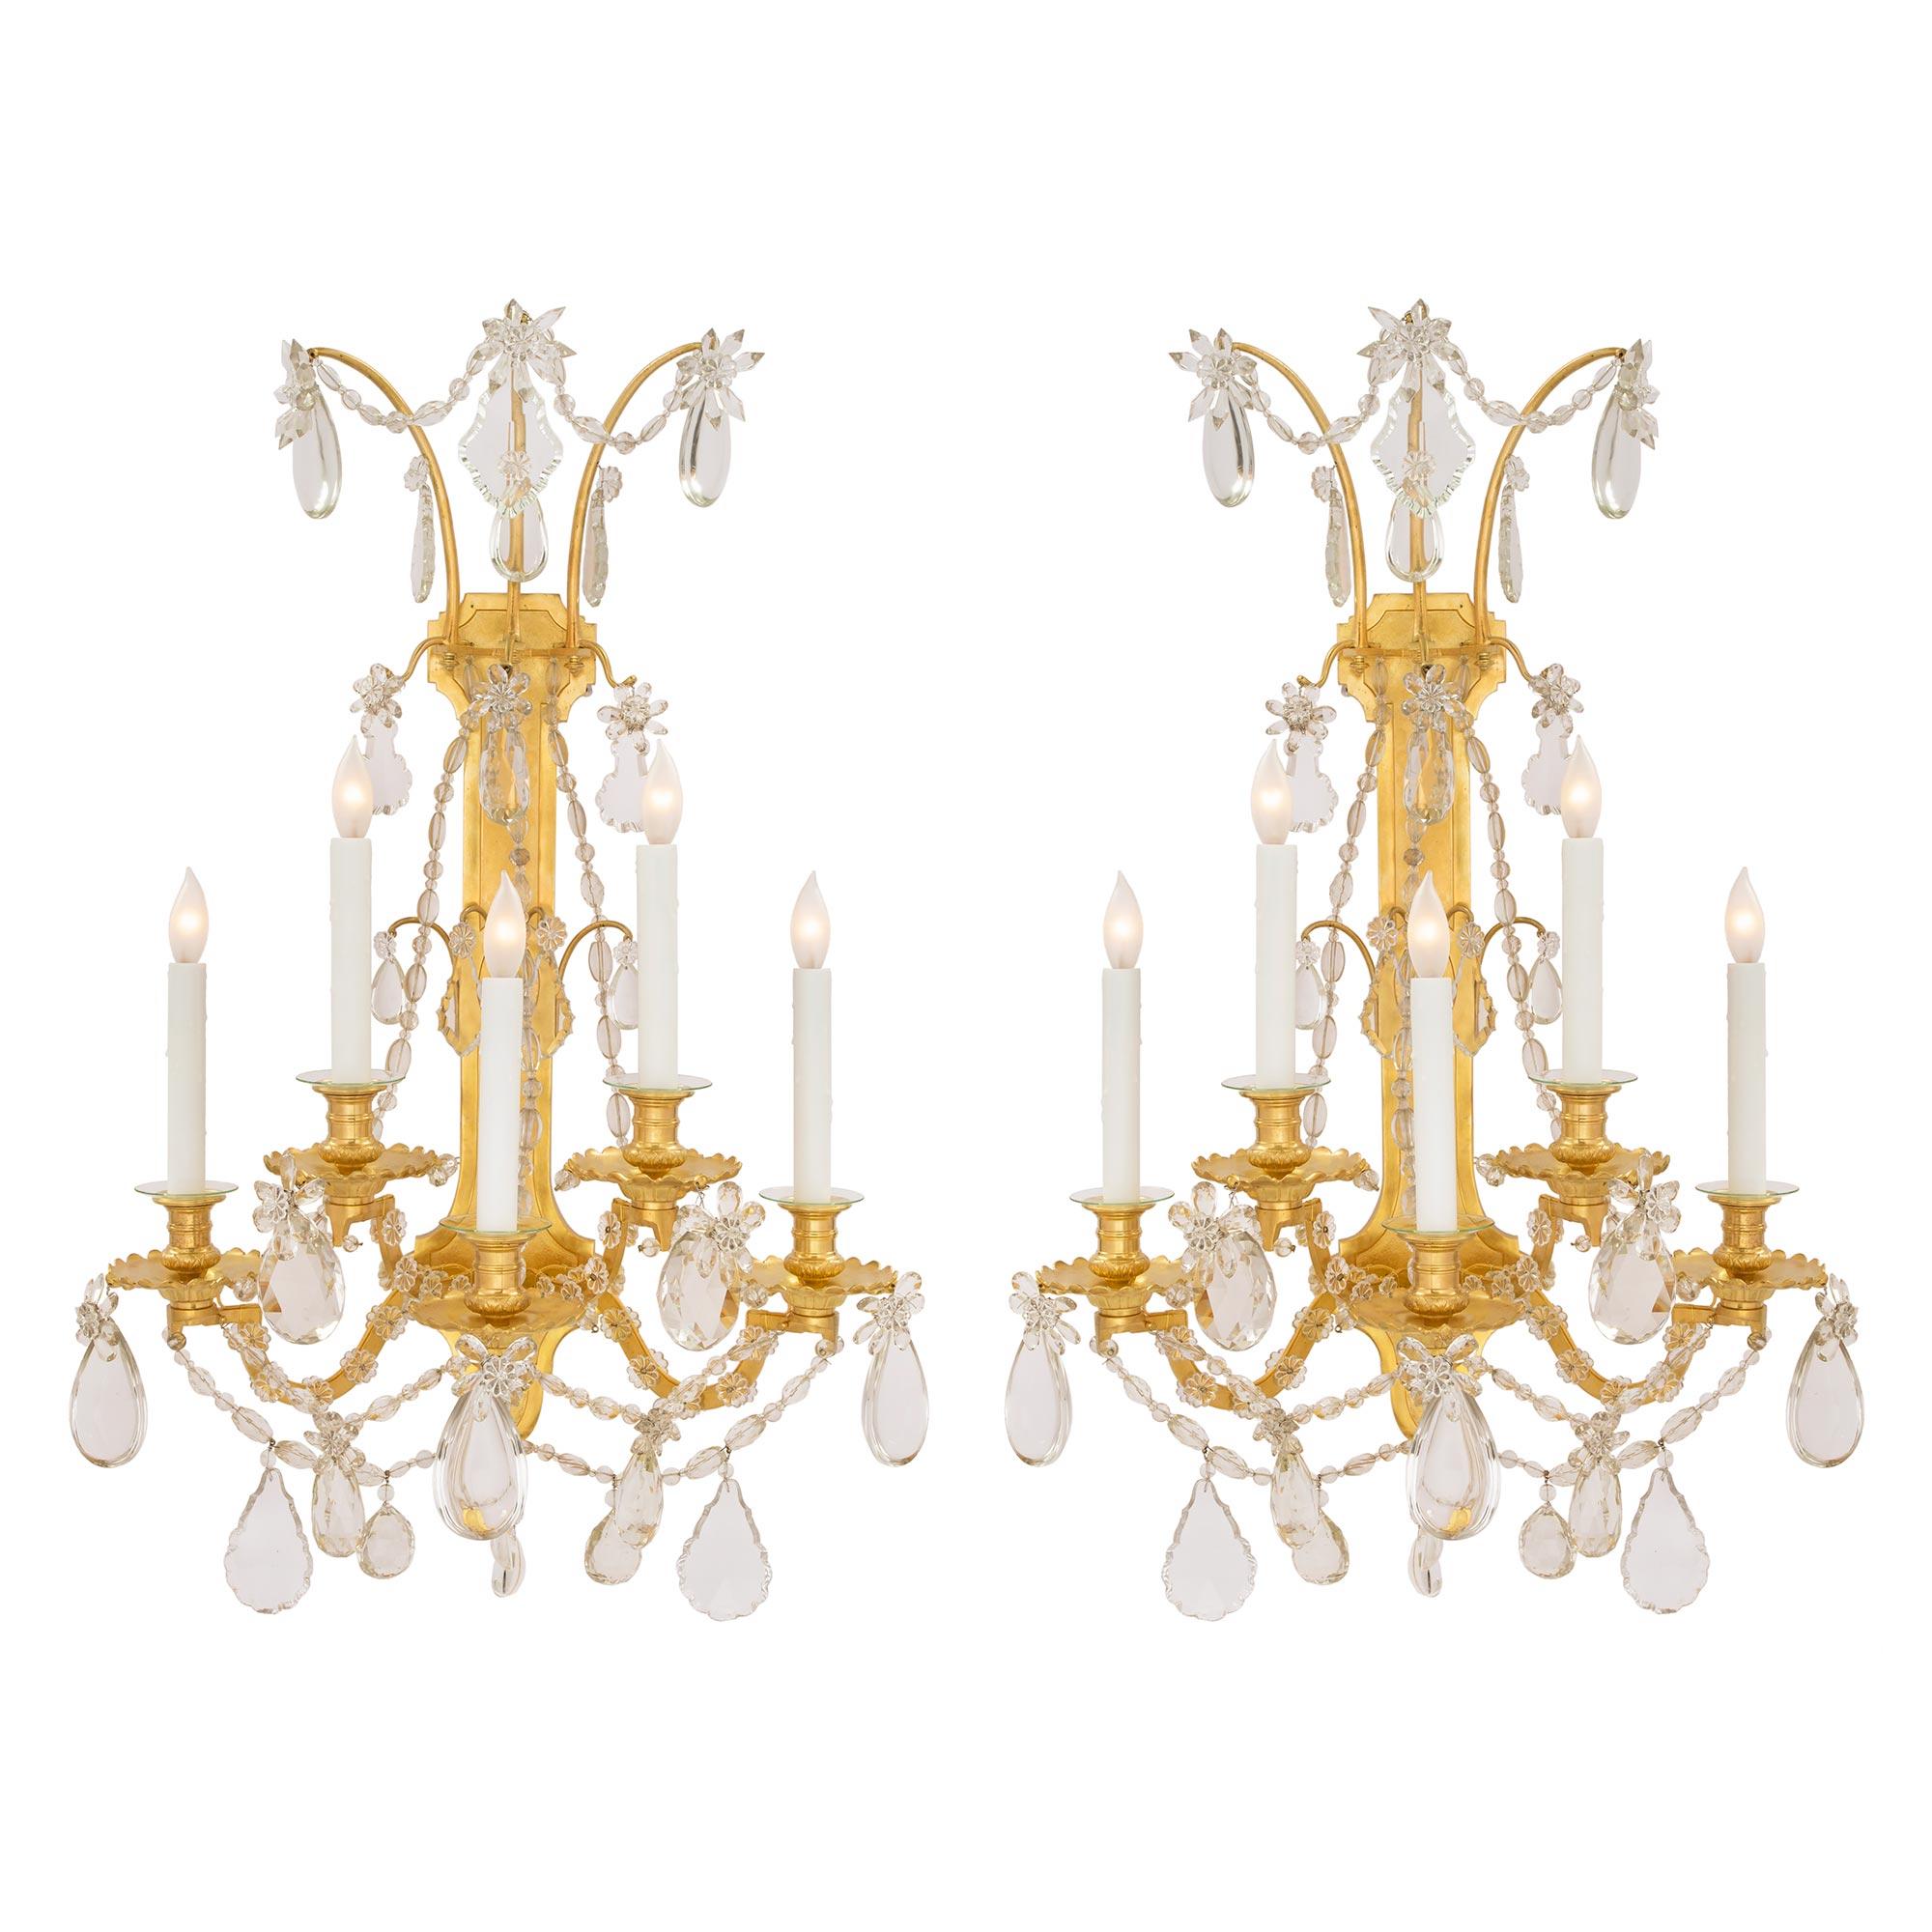 A beautiful pair of French 19th century Louis XVI st. ormolu and Baccarat crystal sconces. Each sconce displays a lovely back plate with a striking recessed textured design. The five scrolled arms are decorated with fine crystal rosettes and